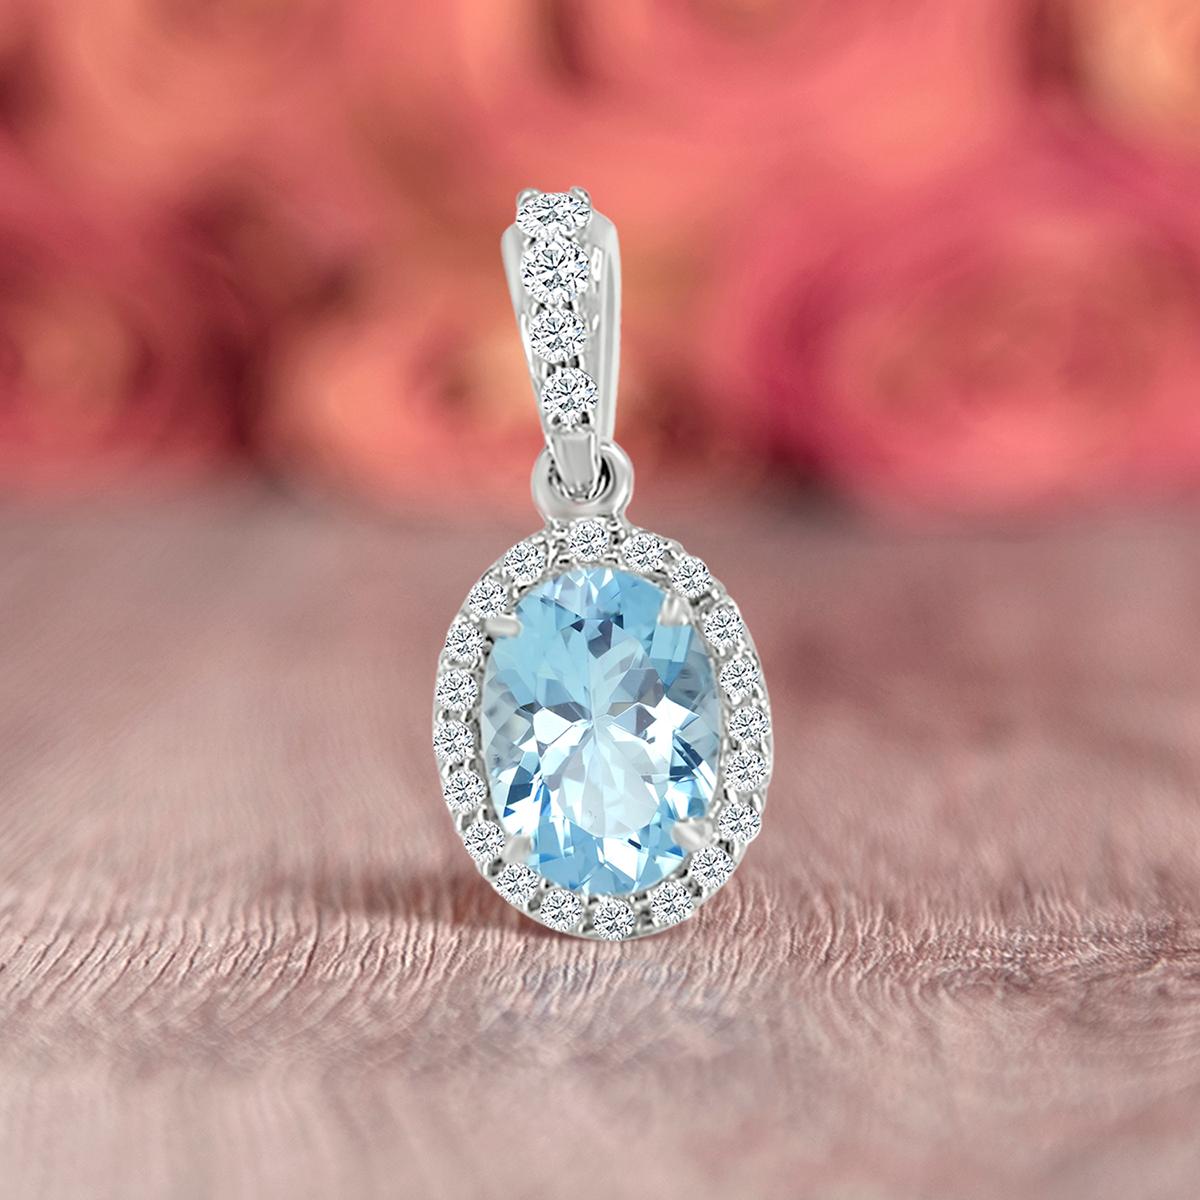 14k White Gold 0.58cts Aquamarine and Diamond Pendant, Style#TS1118AQP 19218/4 In New Condition For Sale In New York, NY